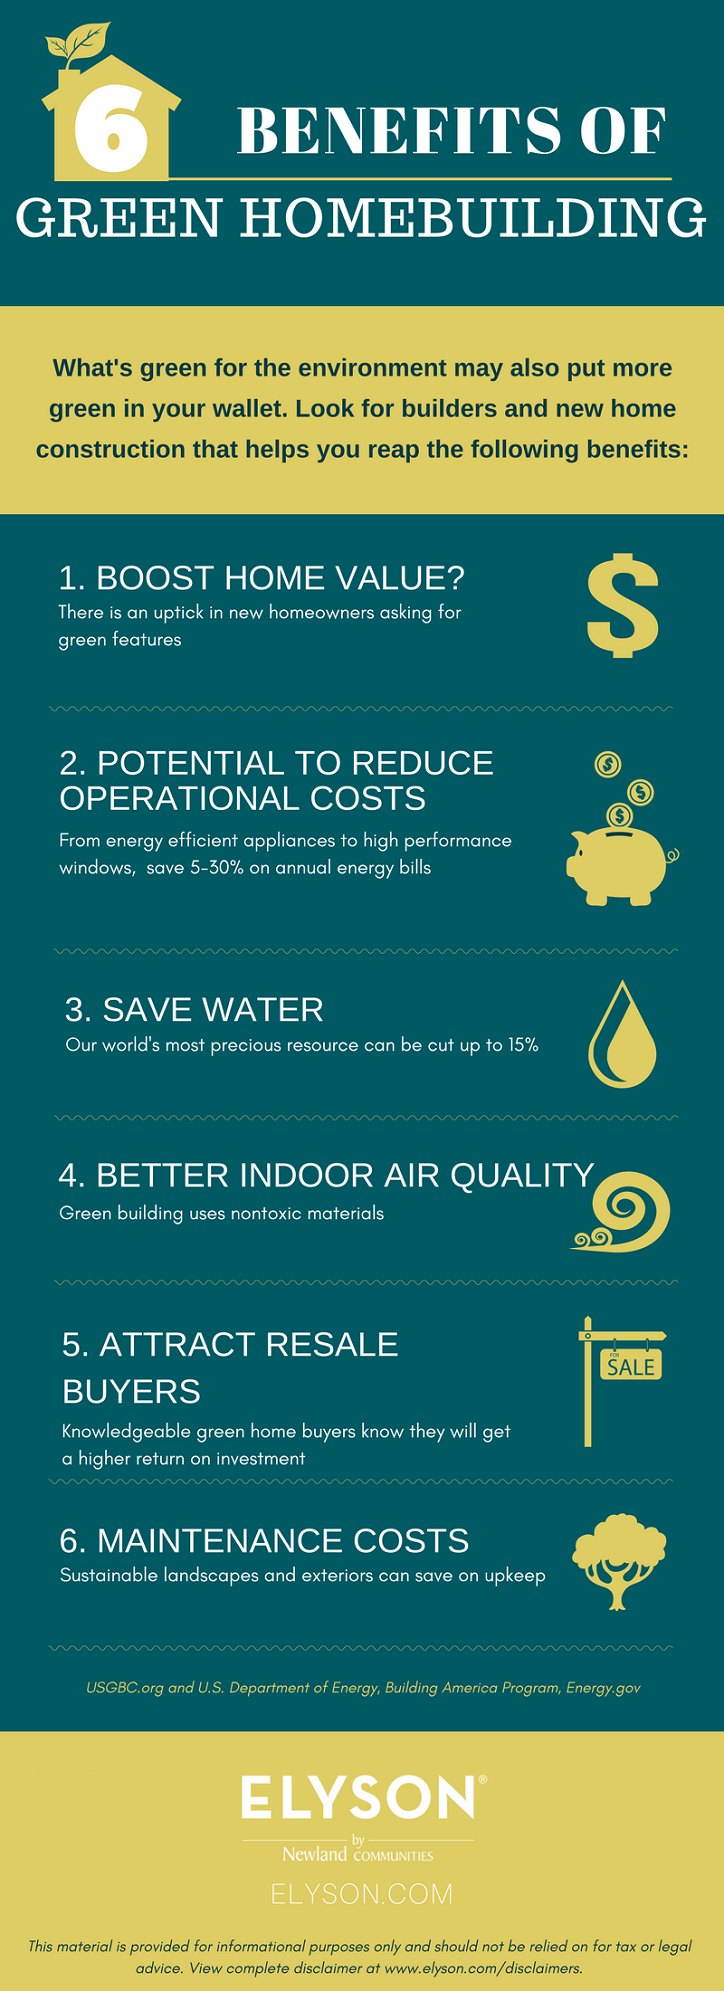 5 benefits of green home-building graphic